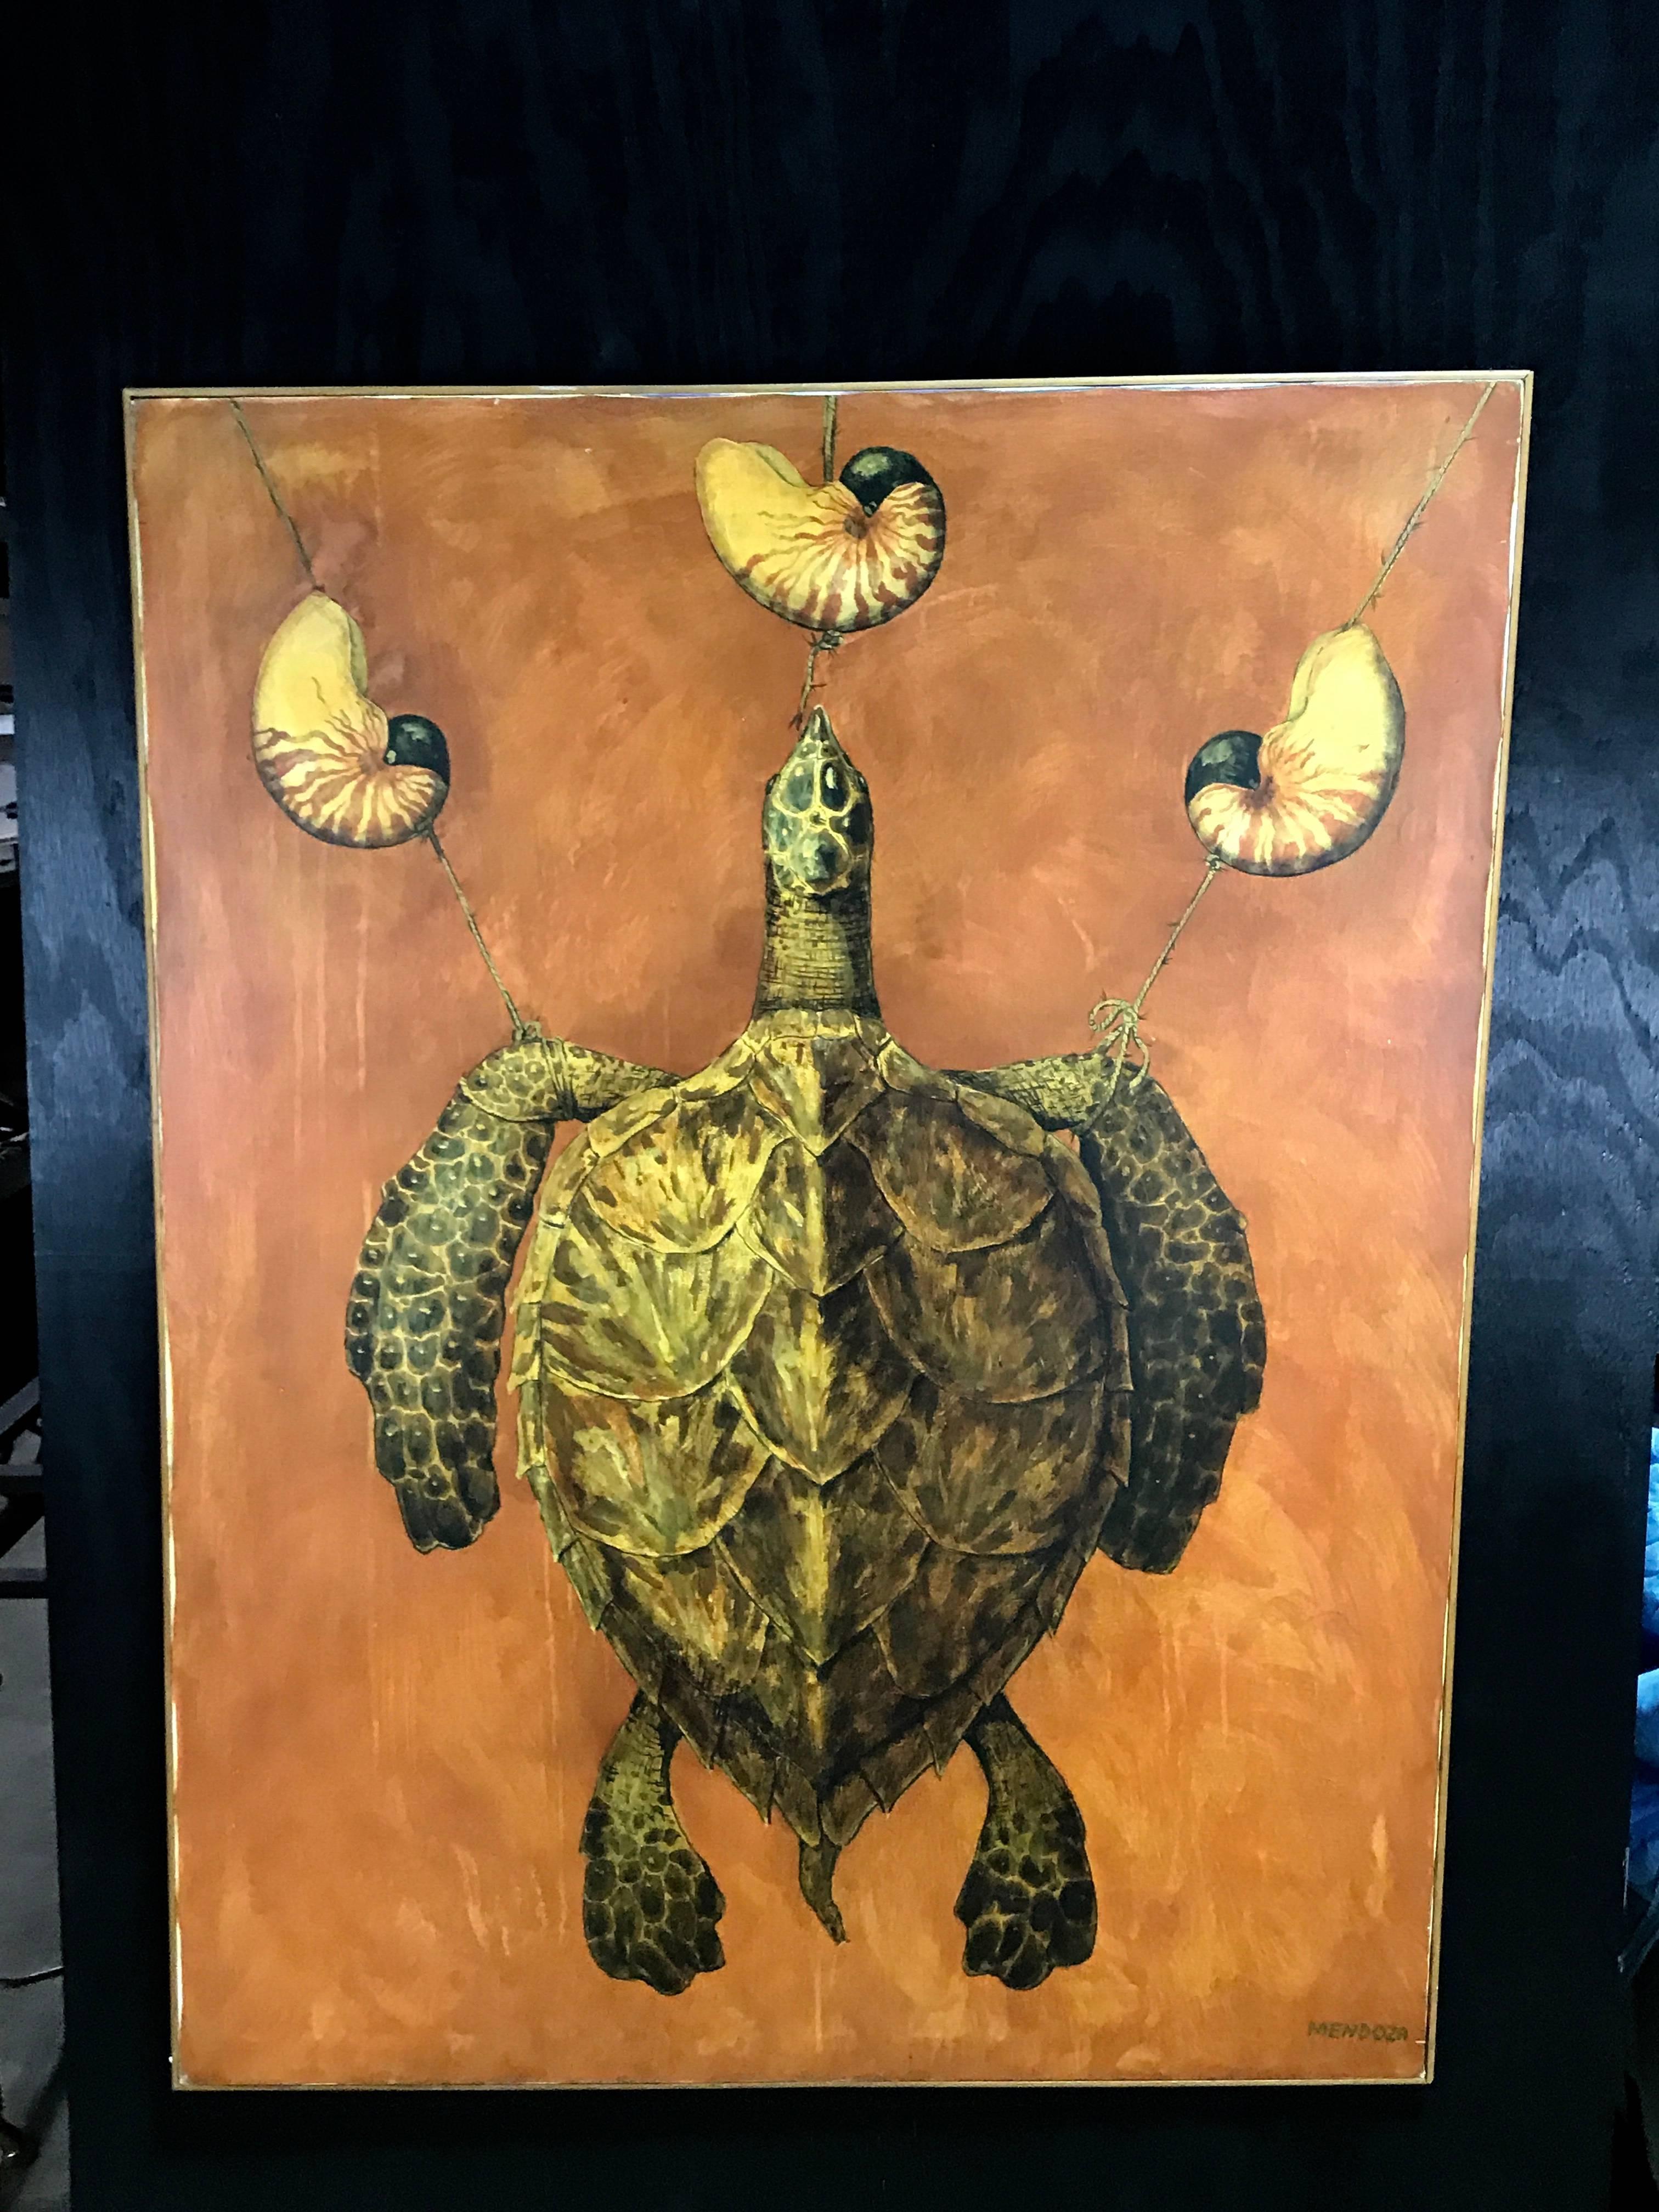 Trompe L'oeil painting by Pepe Mendoza, Mexican, 20th century 
Still life turtle and shells
Signed Mendoza lower right
Oil on canvas 38